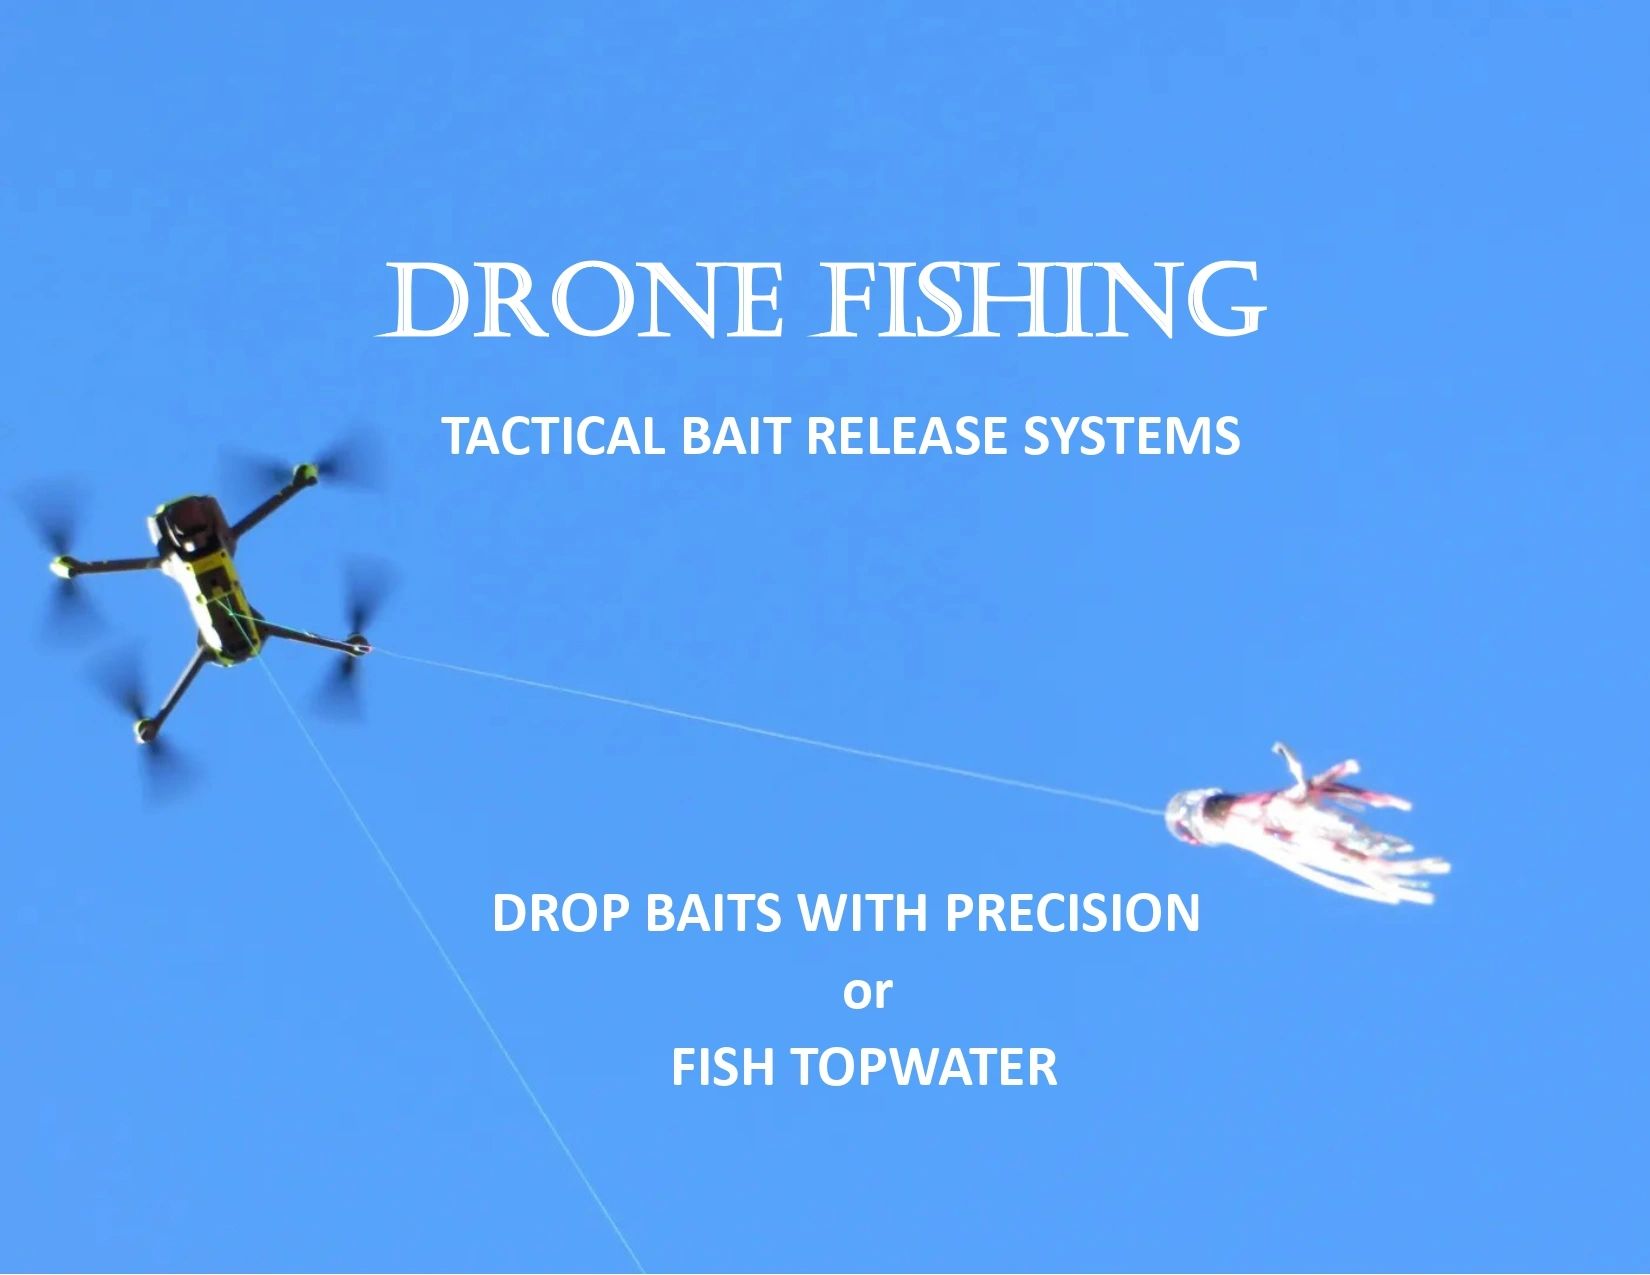 https://img1.wsimg.com/isteam/ip/8f3cc468-ab59-4a3f-bccb-6d4abfeefb62/DRONEFISHER%20TACKLE%20FRONTPAGE-b770d92.jpg